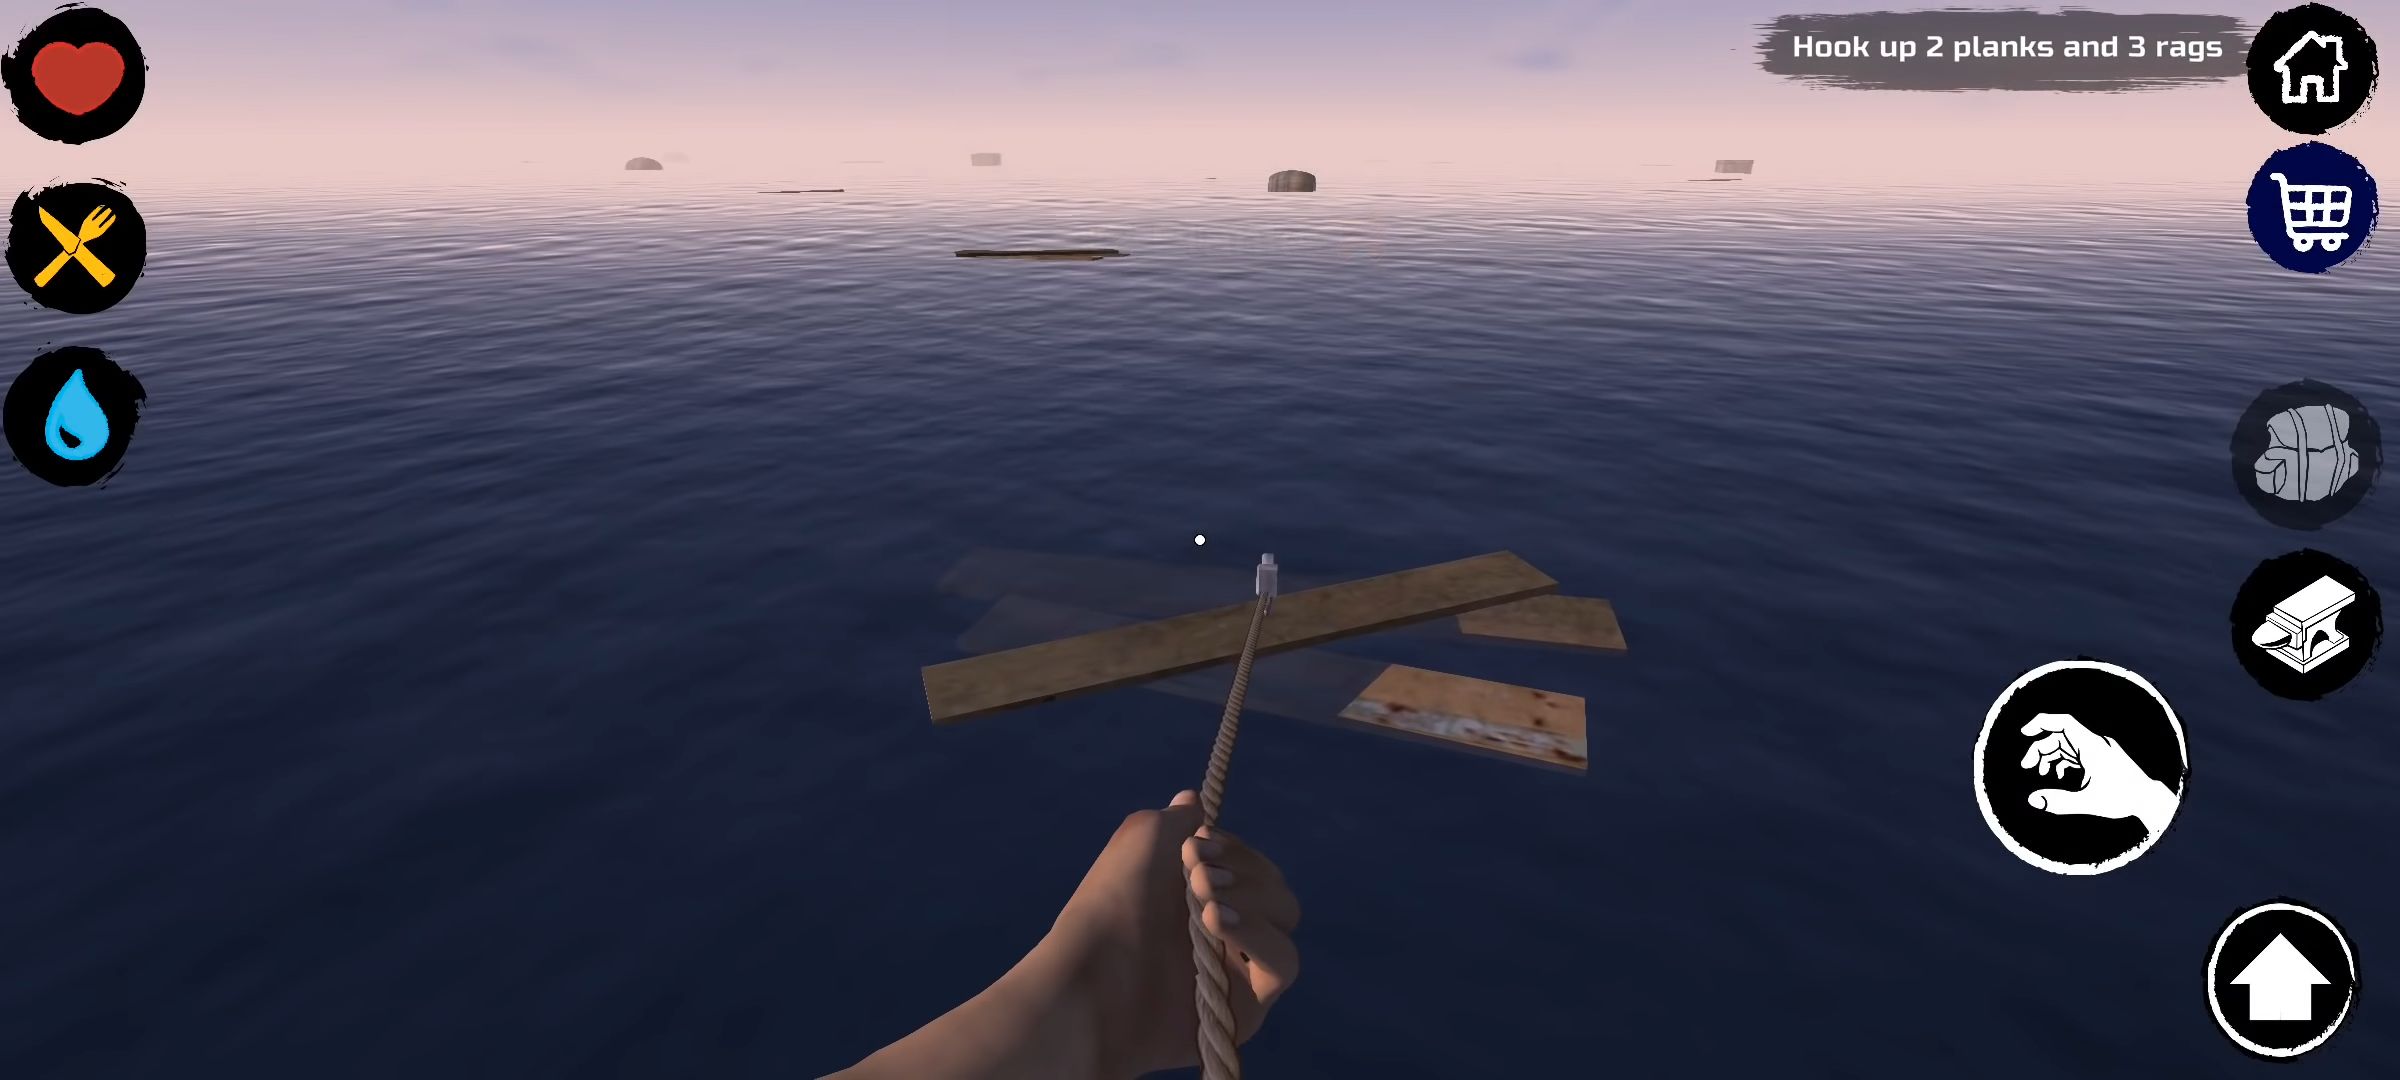 Télécharger Survival and Craft: Crafting In The Ocean pour Android gratuit.